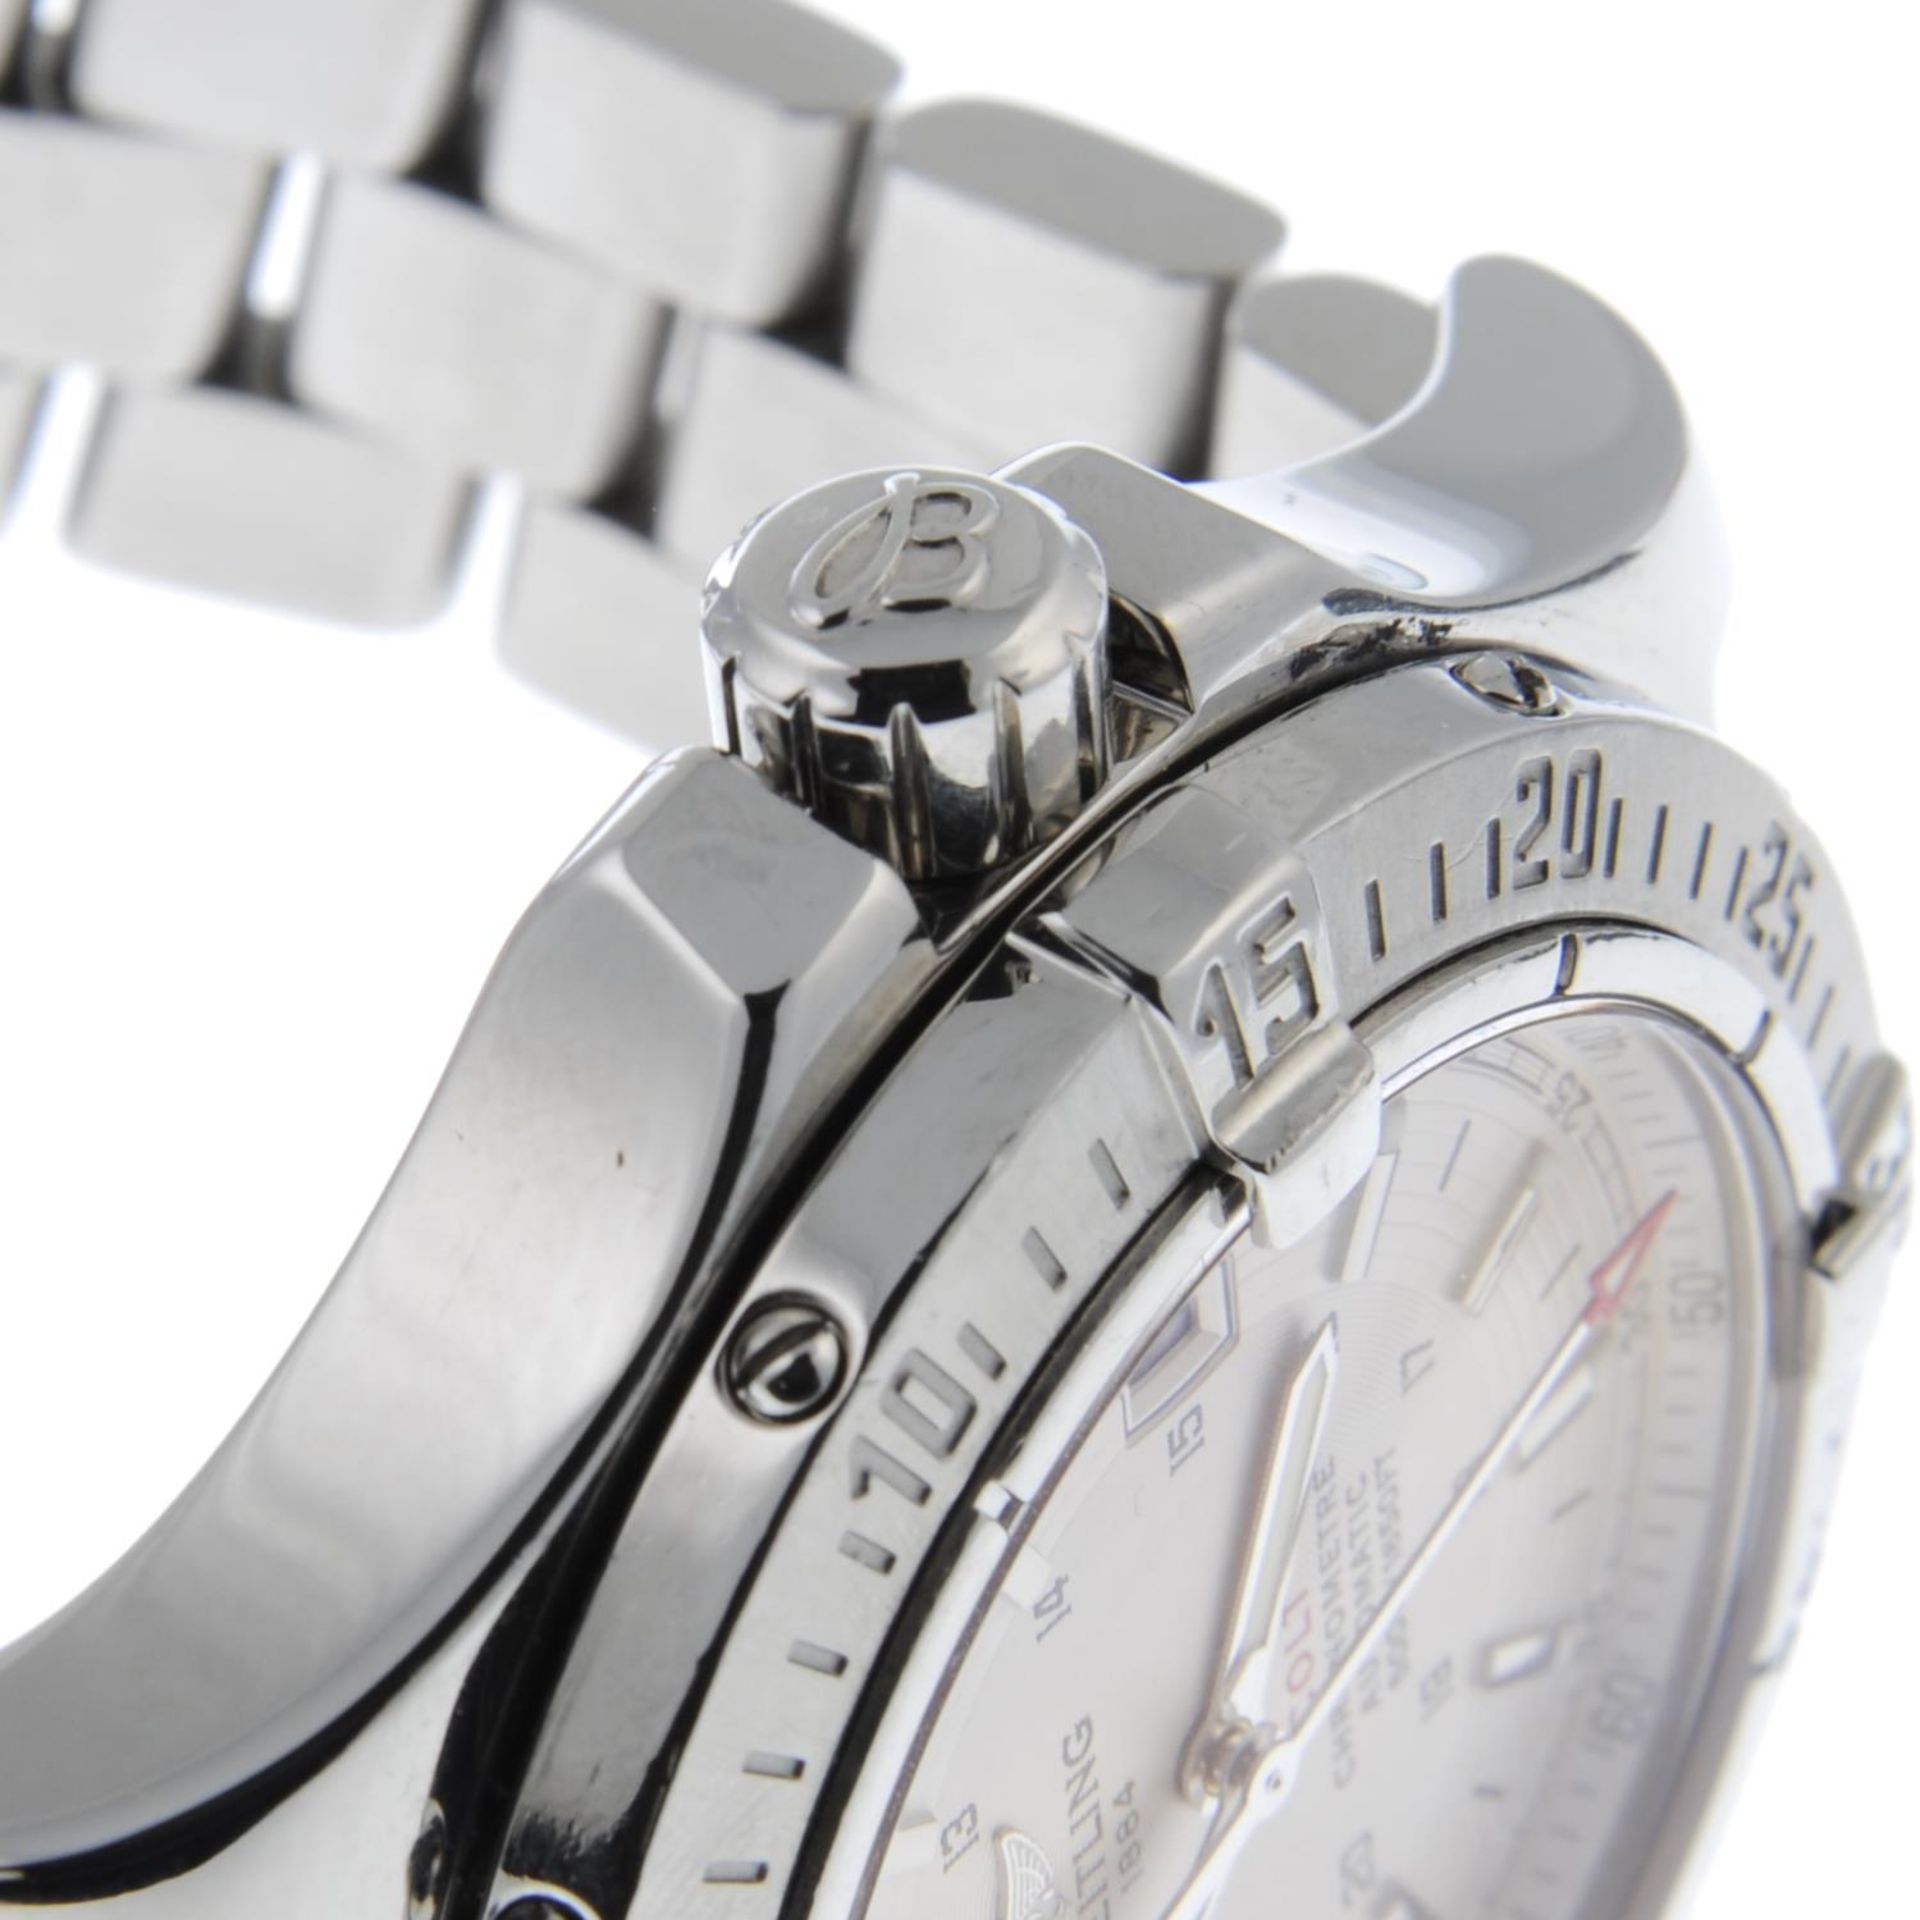 BREITLING - a Colt bracelet watch.Stainless steel case with calibrated bezel. - Image 5 of 5